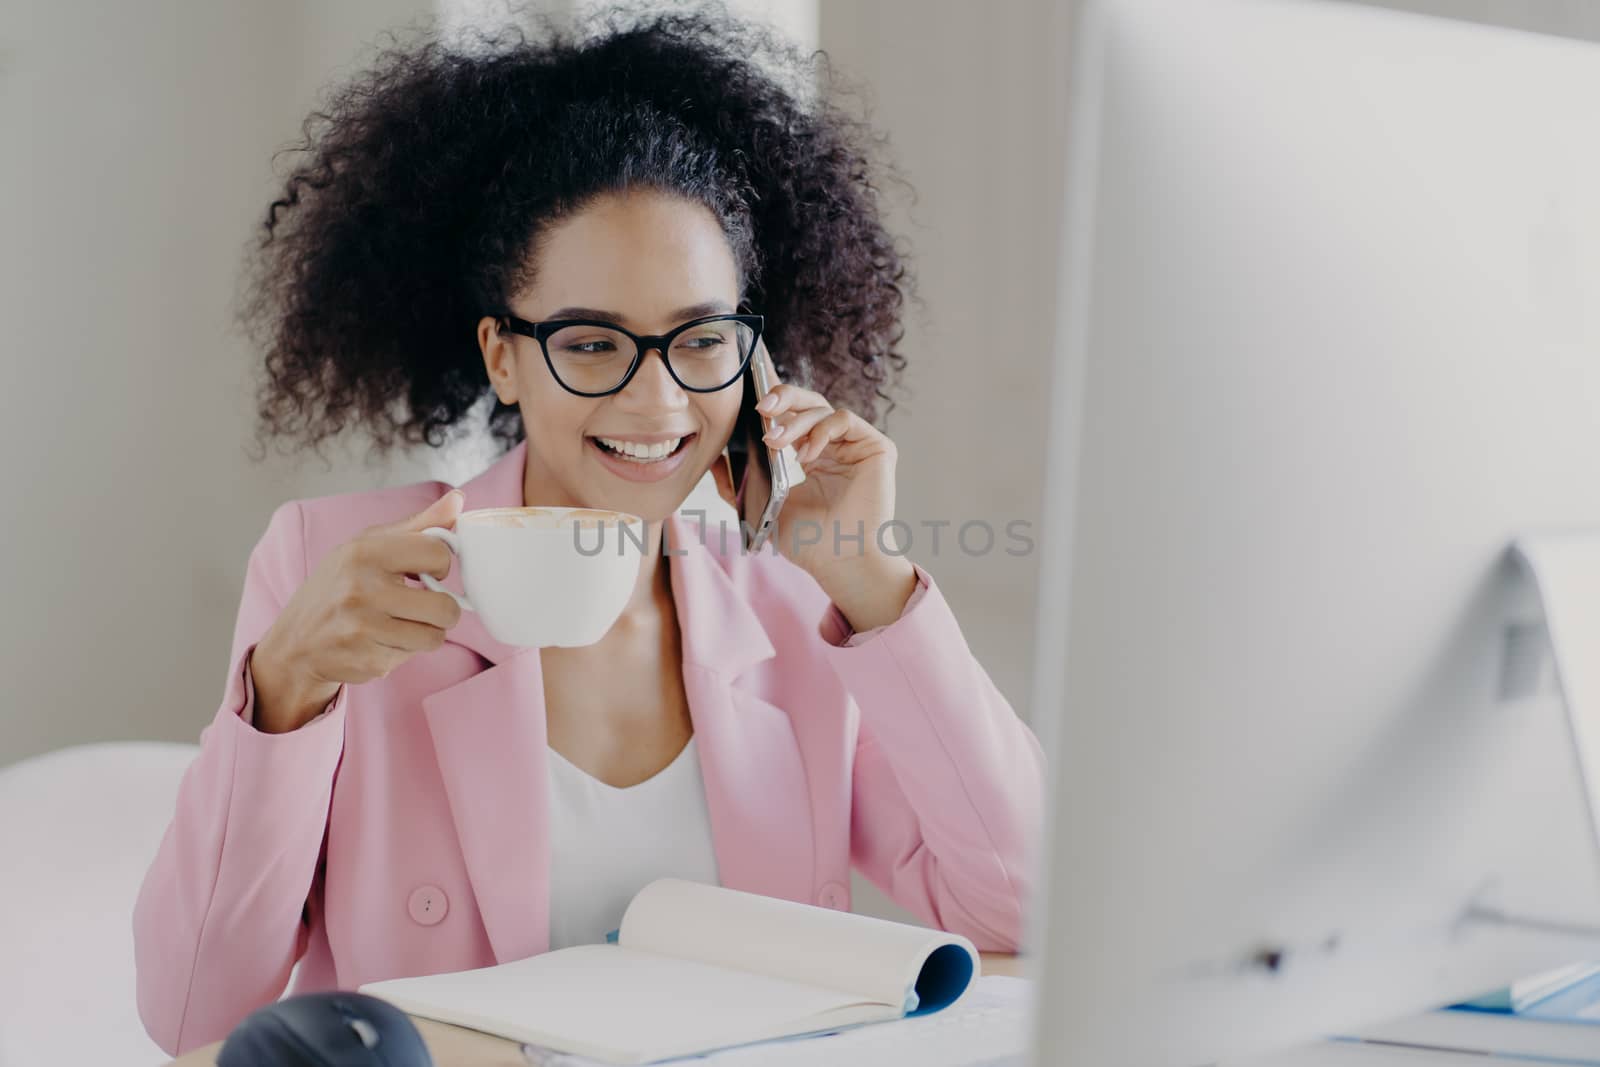 Photo of attractive smiling female entrepreneur enjoys aromatic beverage, holds white mug of drink, has telephone conversation, dressed in formal outfit, poses at workplace, wears transparent glasses by vkstock